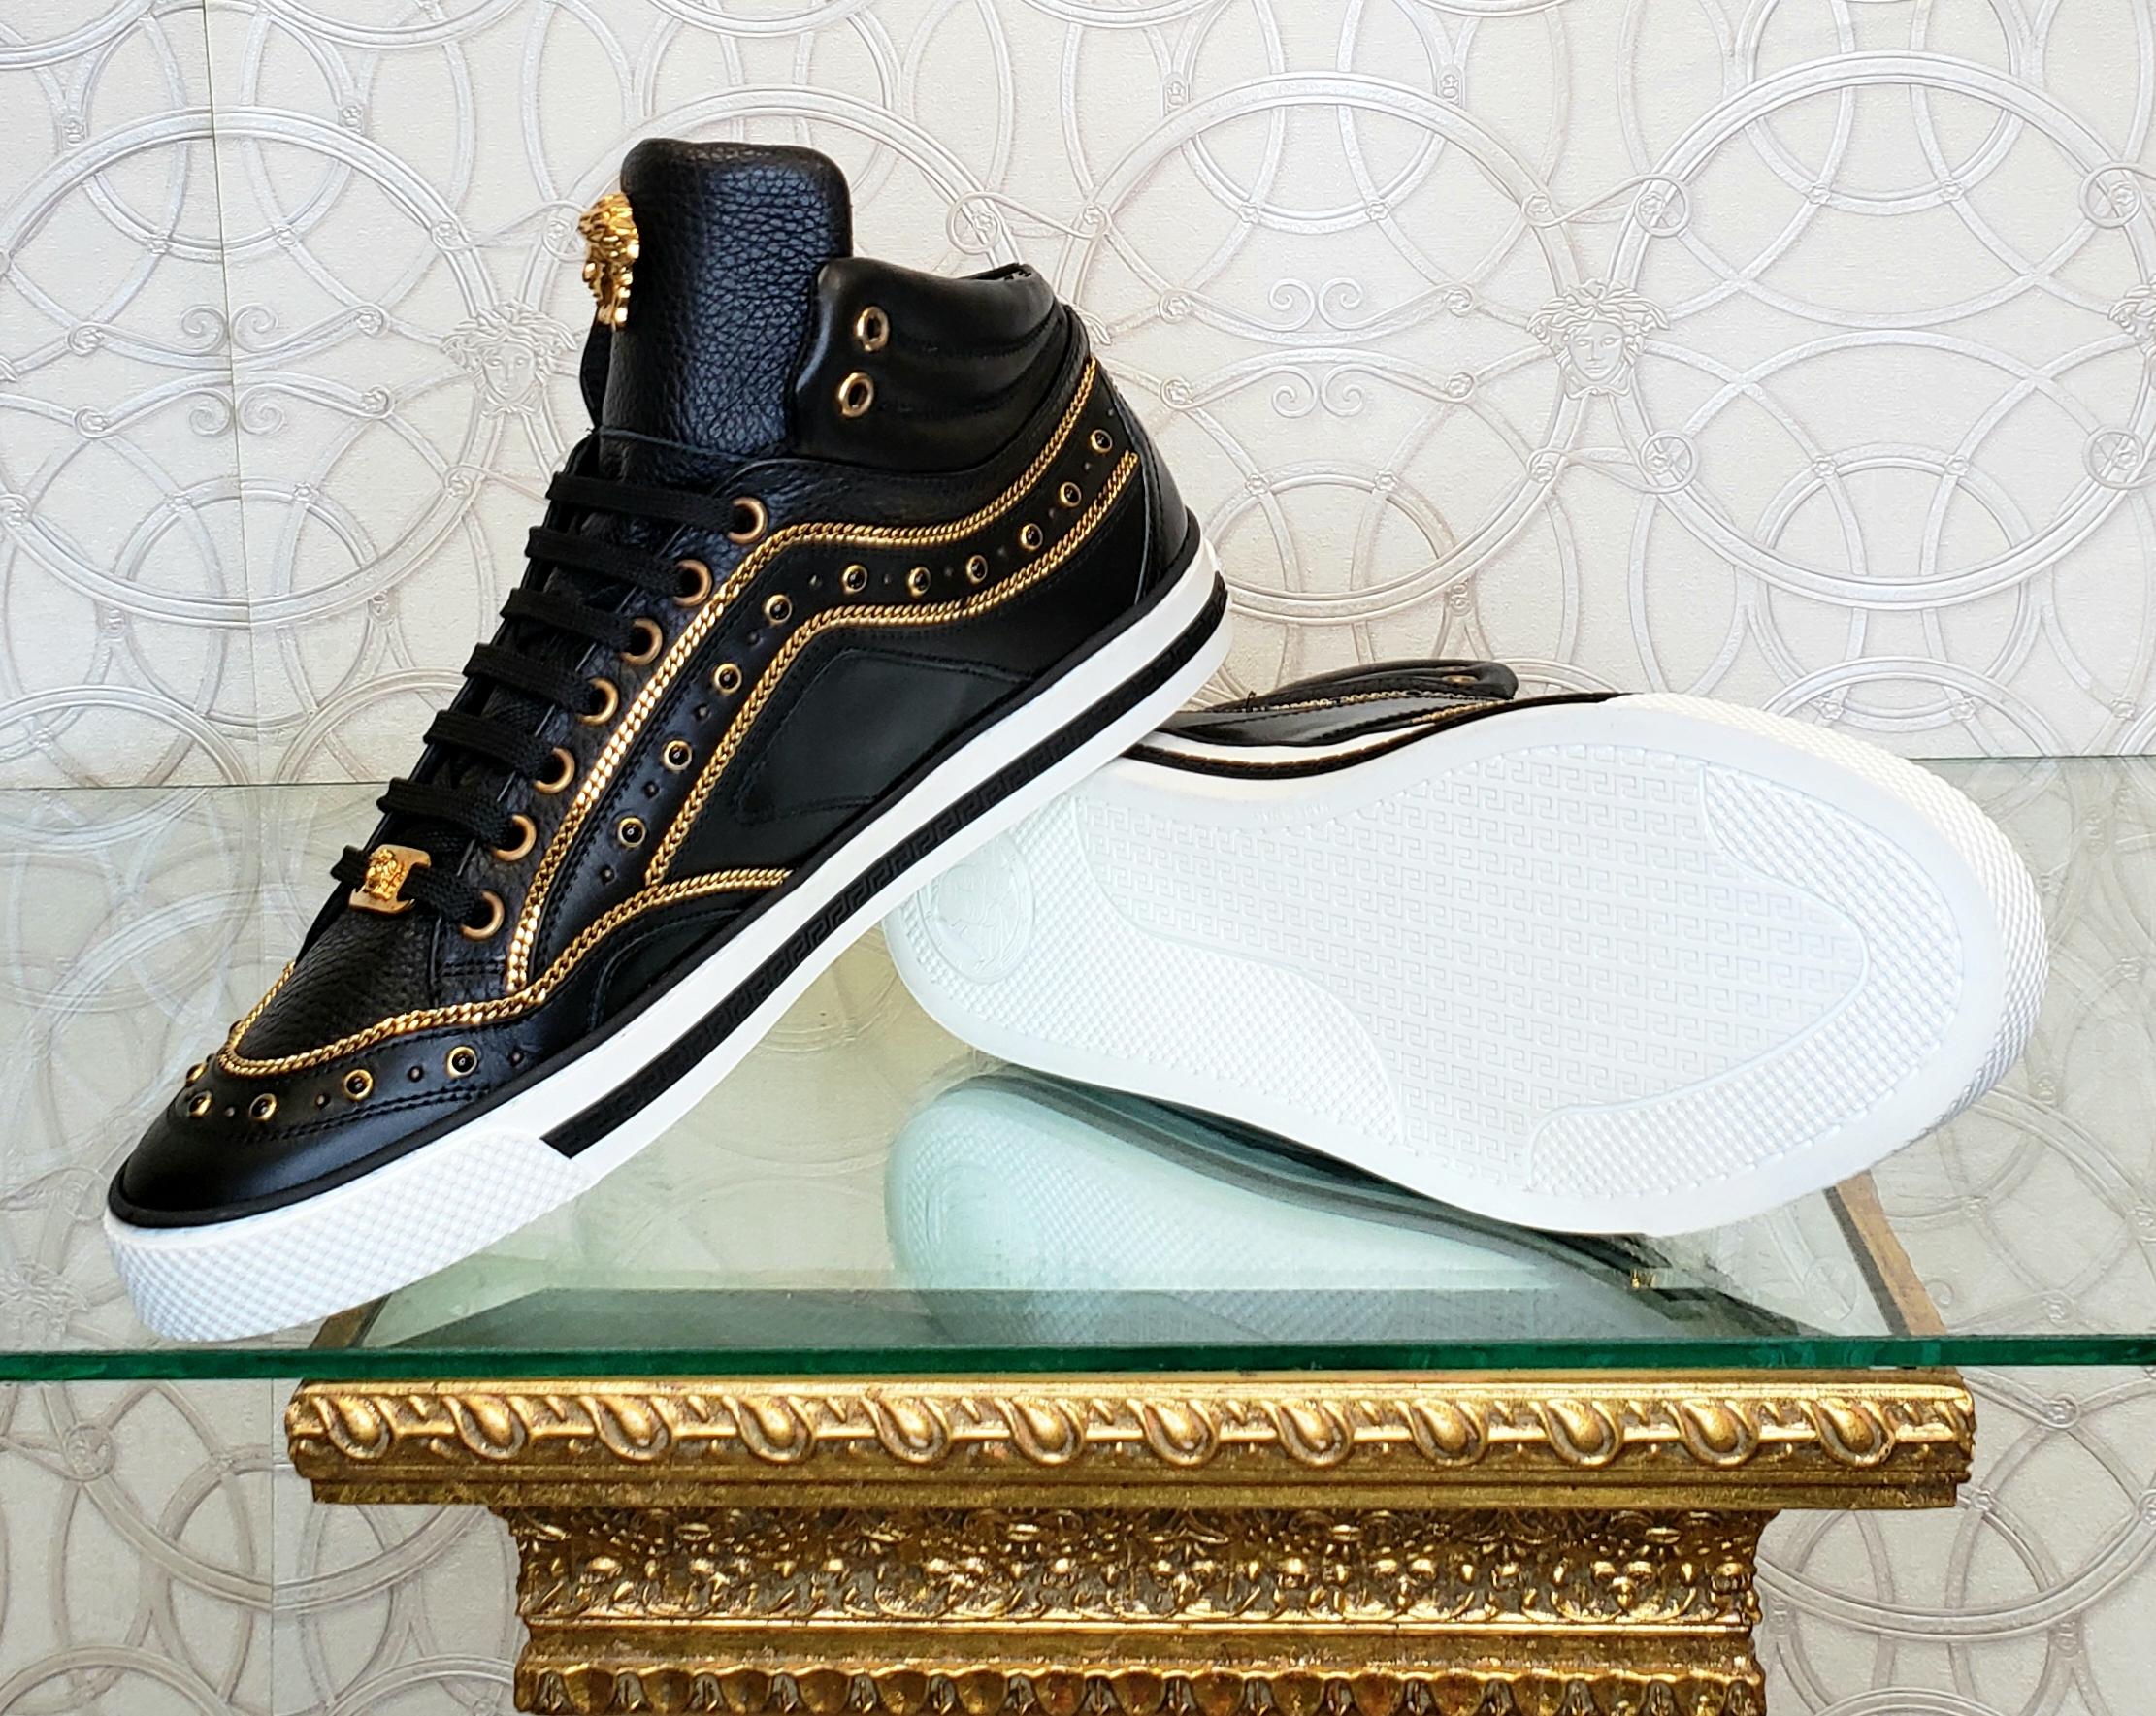 NEW VERSACE STUDDED HIGH-TOP SNEAKERS with GOLD 3D MEDUSA BUCKLE SIZE 43 - 10 2